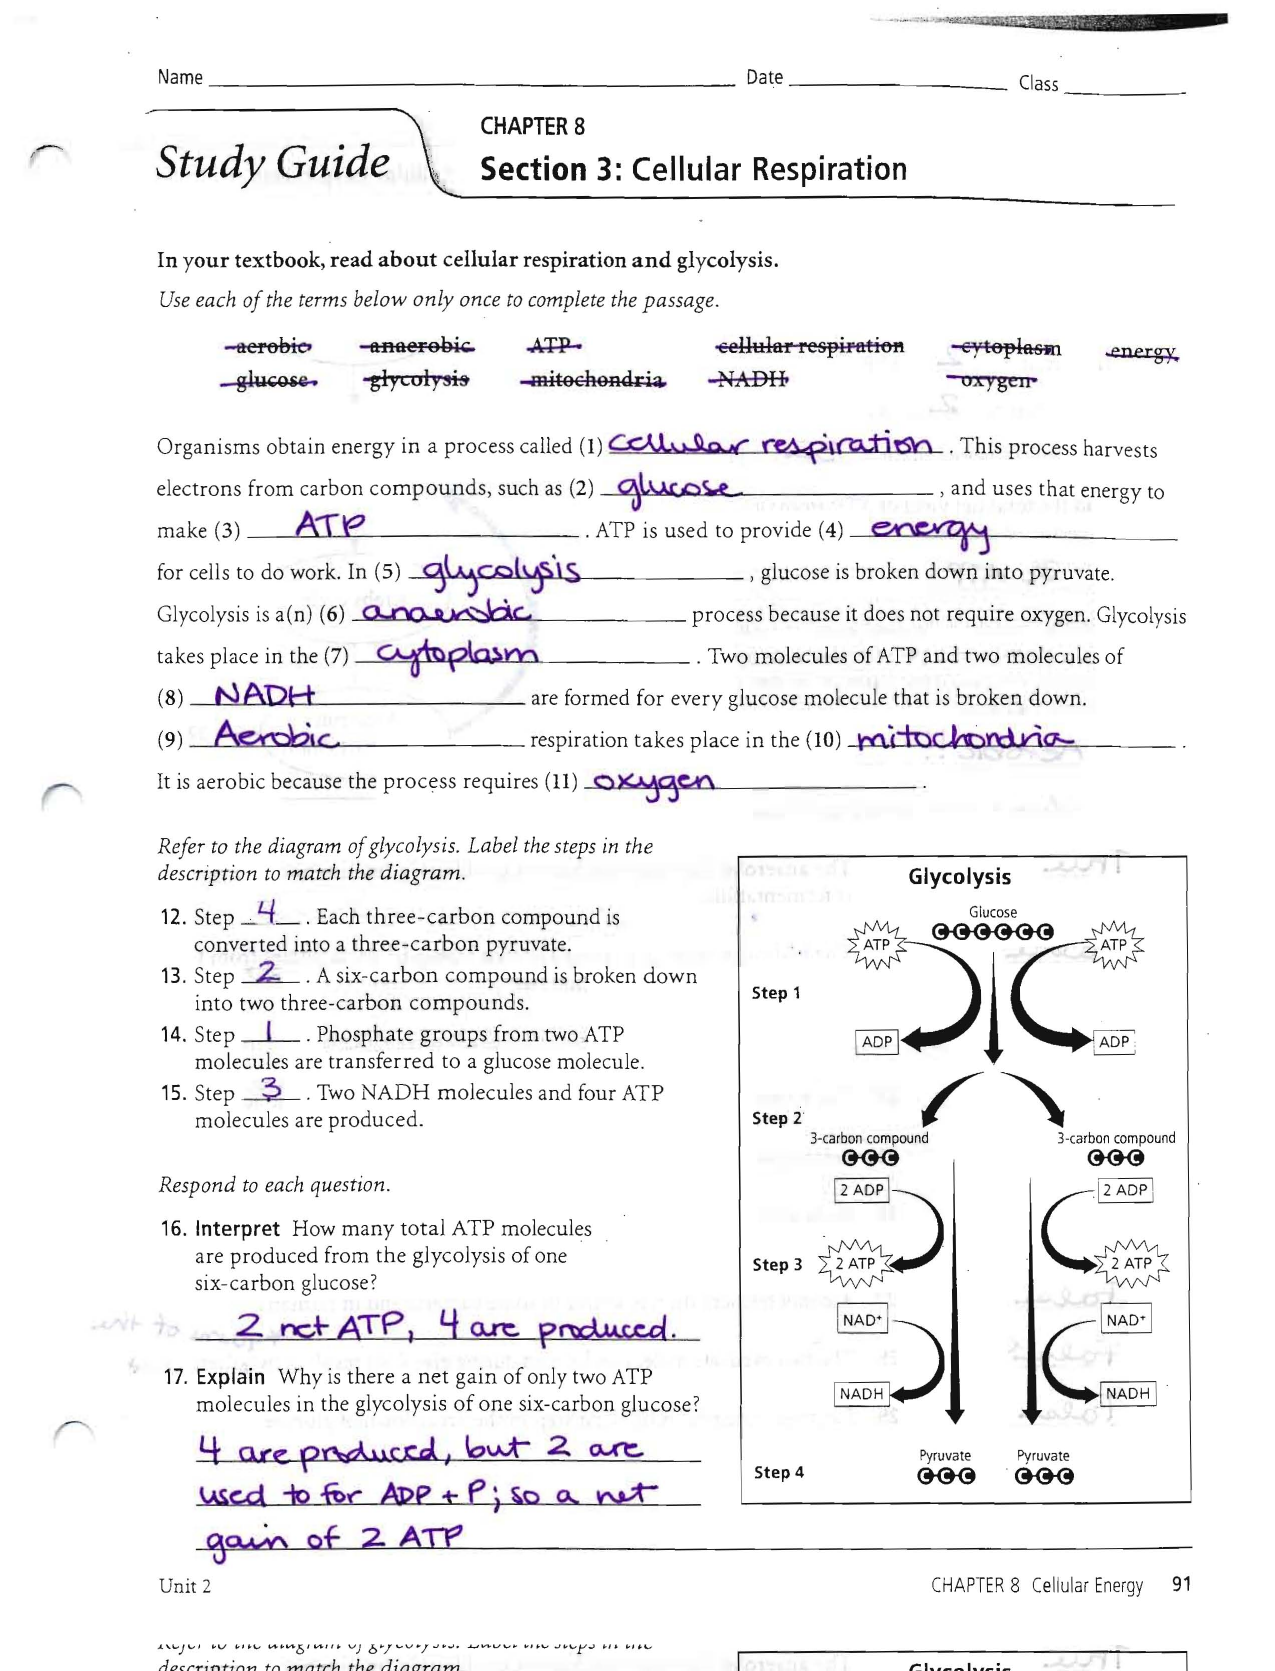 cellular respiration critical thinking questions answers